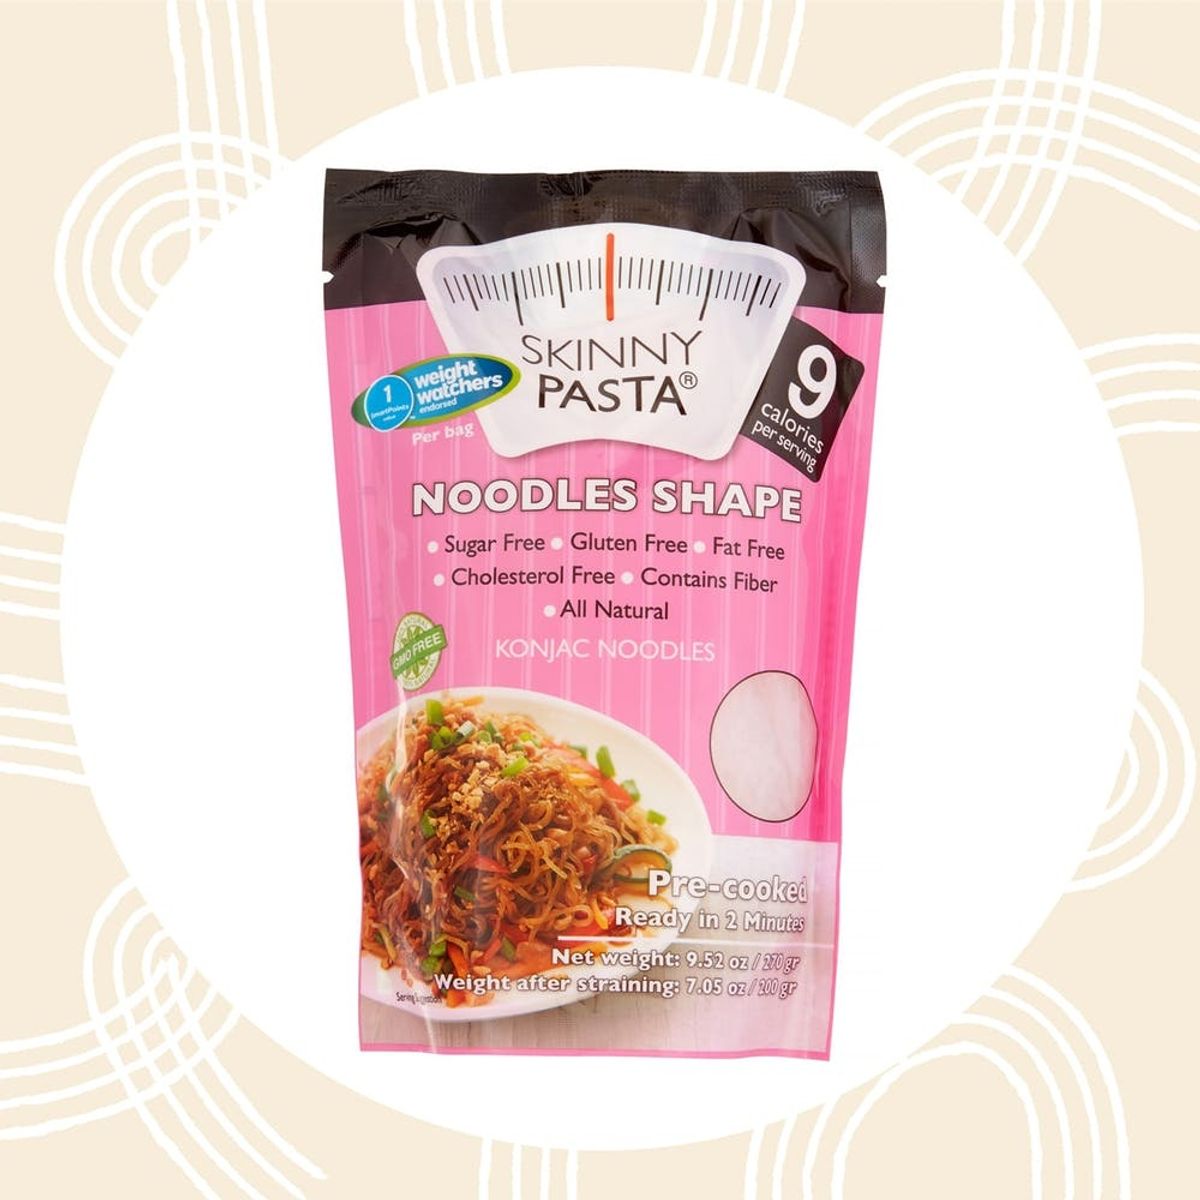 Keto Dieters, Stock Up on Skinny Noodles to Keep Your Carb Count Low